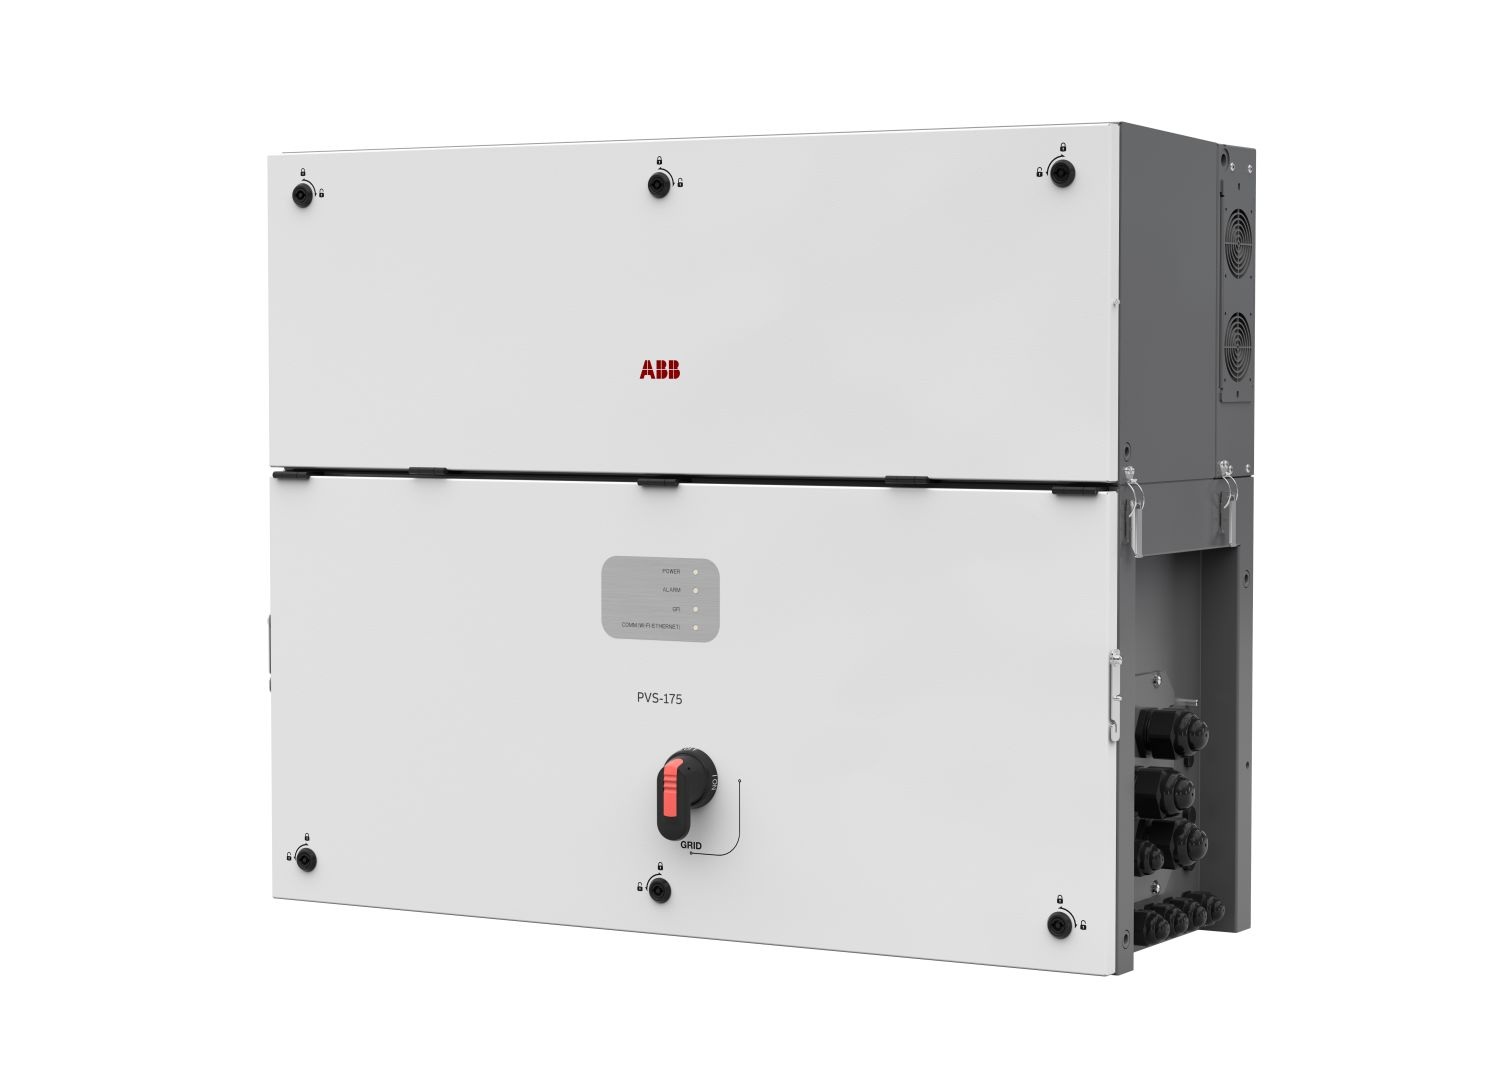 ABB’s solar inverter PVS175TL reduces costs by up to 65 percent